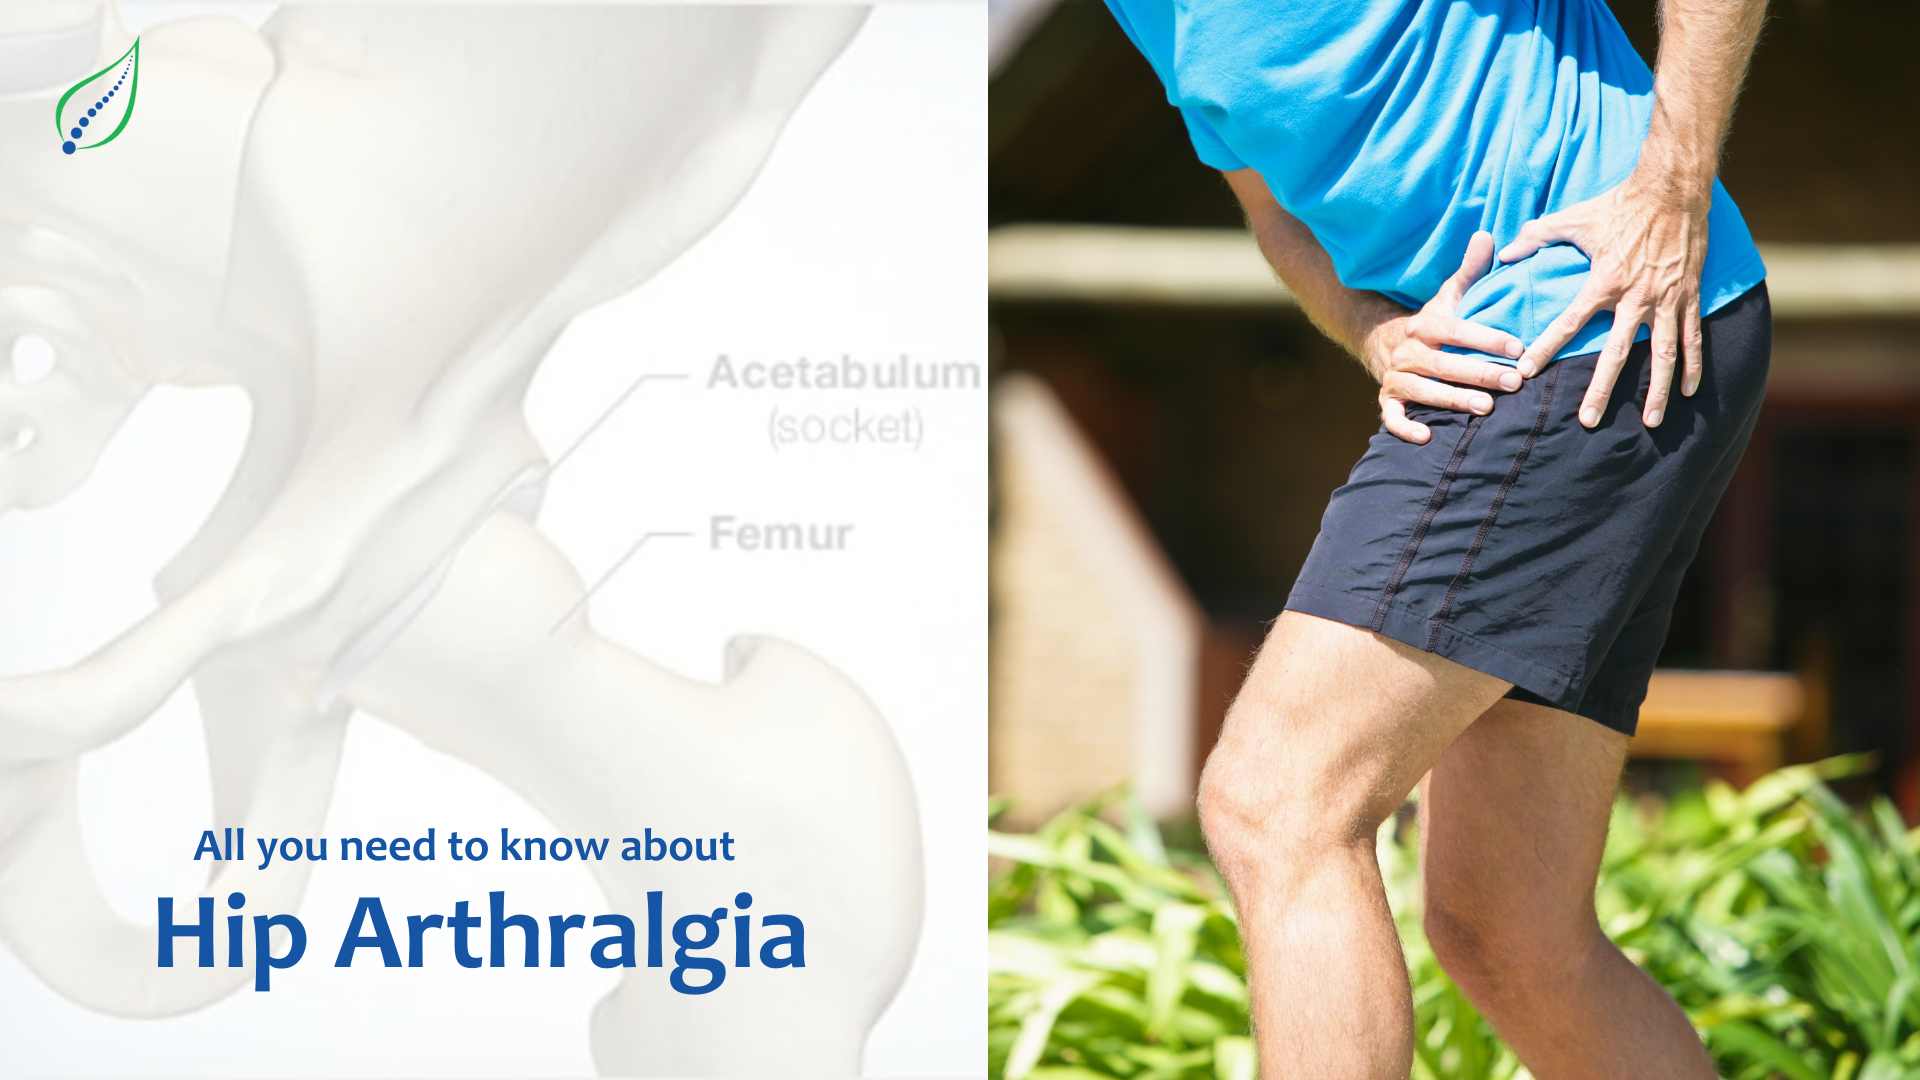 All you need to know about Hip Arthralgia